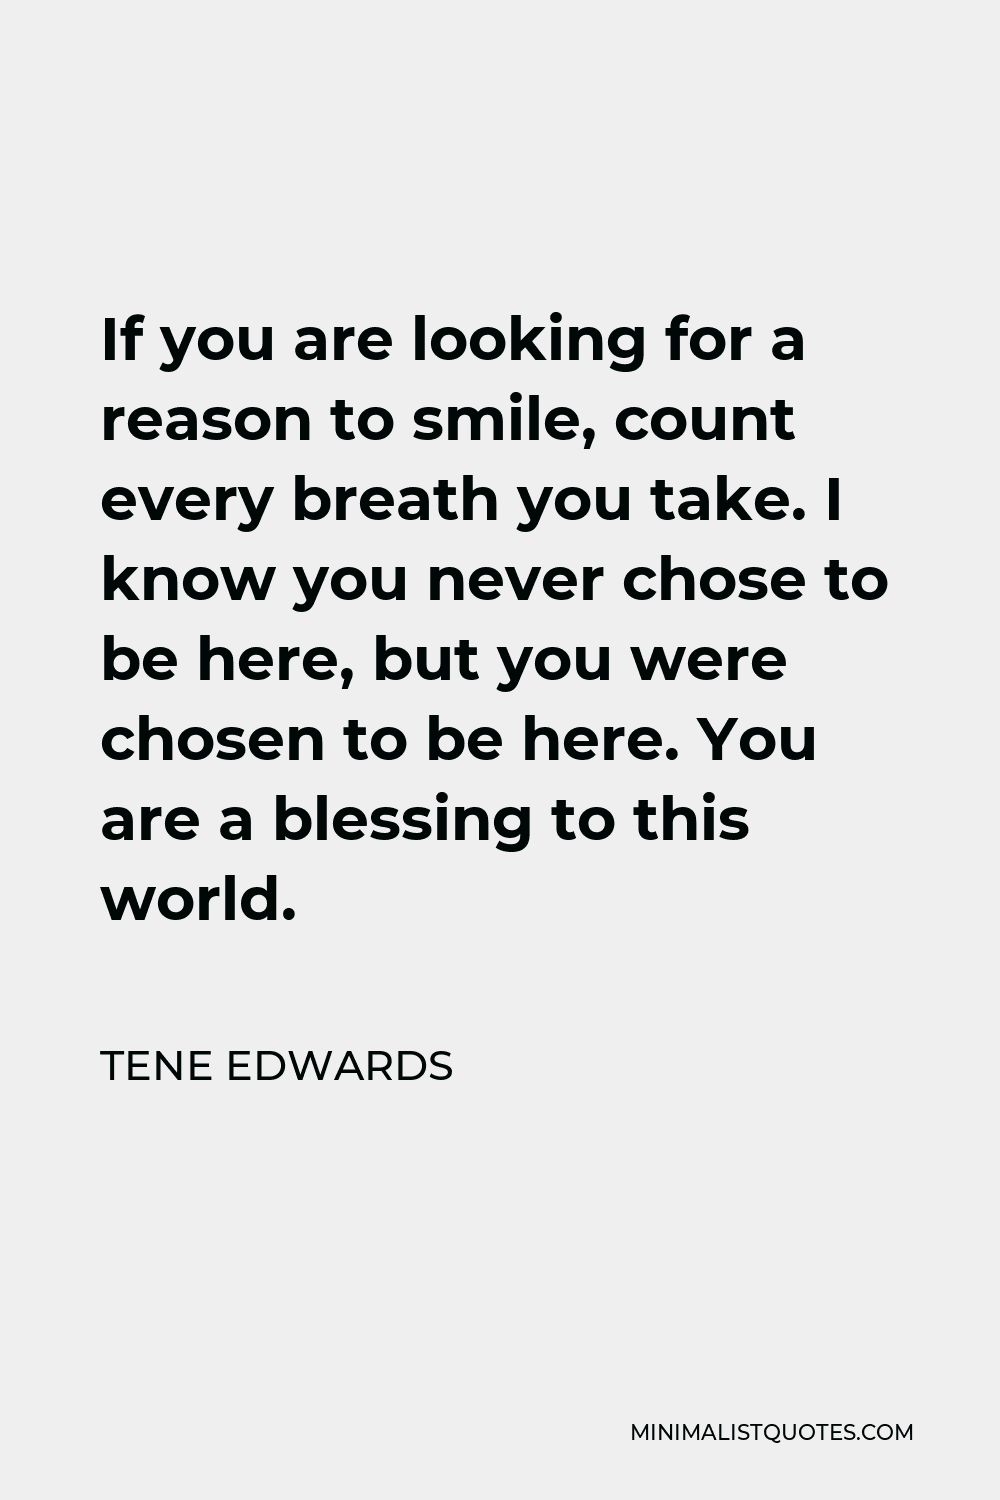 Tene Edwards Quote - If you are looking for a reason to smile, count every breath you take. I know you never chose to be here, but you were chosen to be here. You are a blessing to this world.